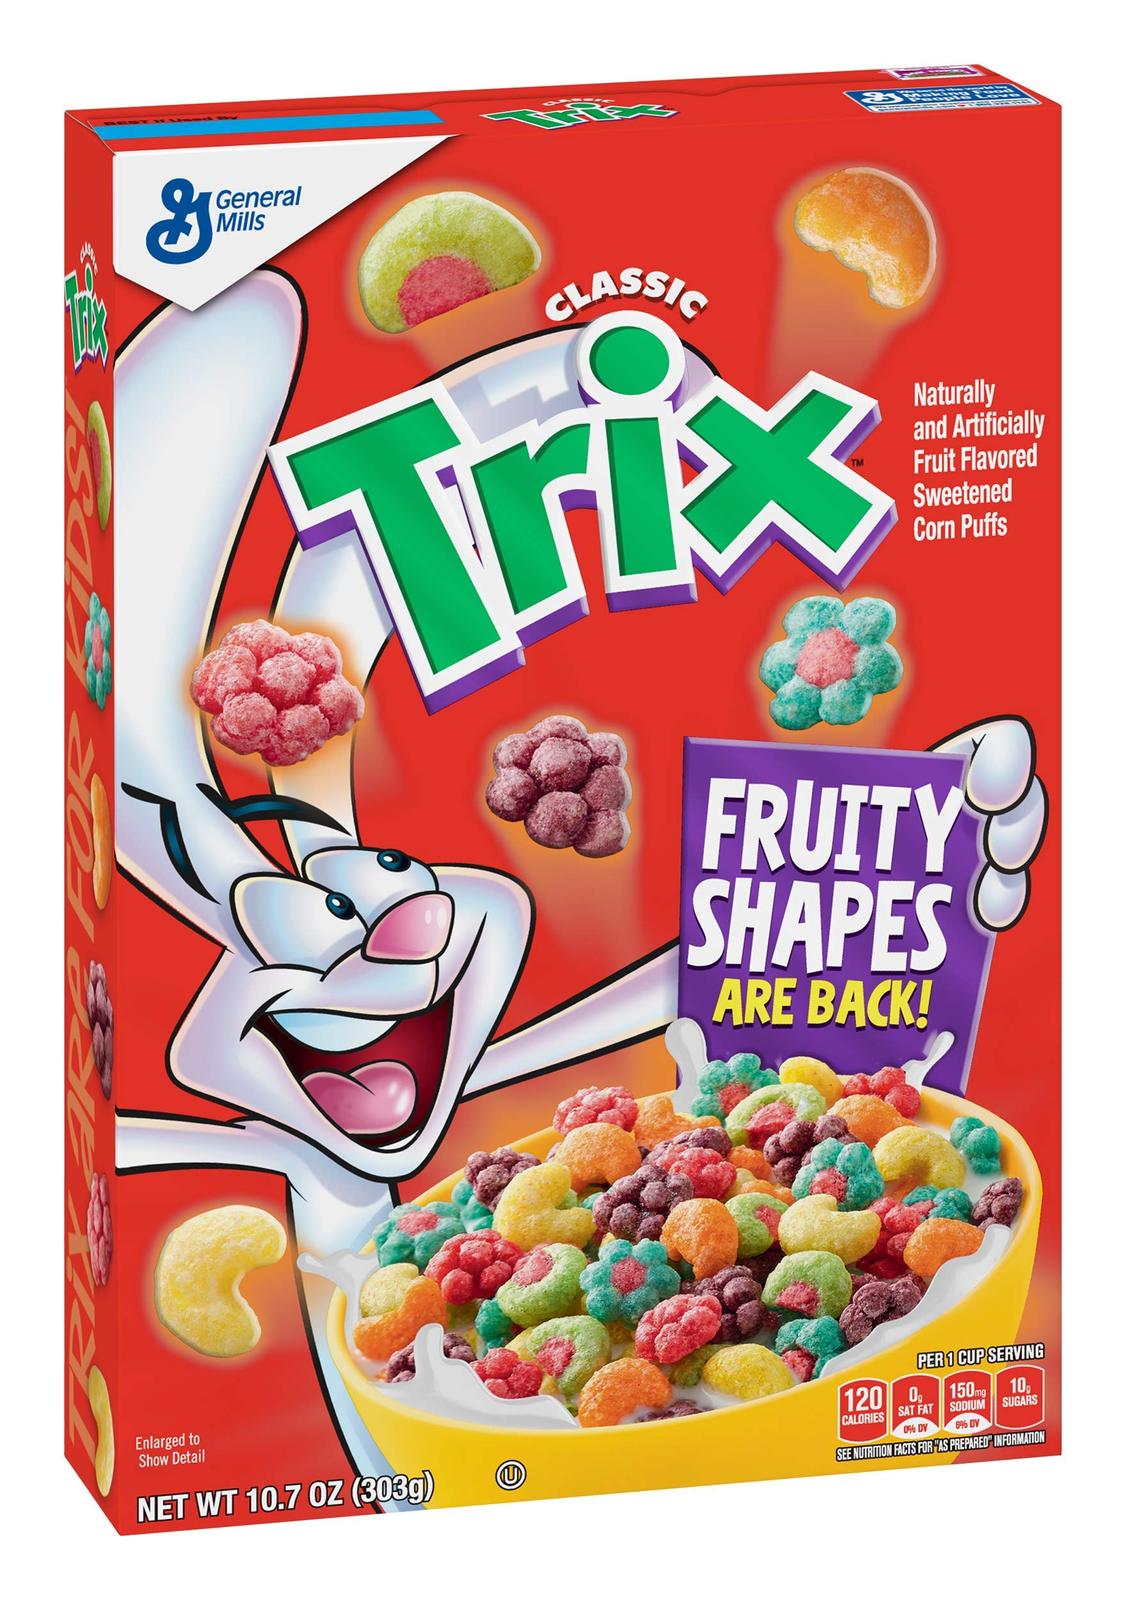 Trix Breakfast Cereal Naturally Flavored Sweetened Corn Puffs 10 Oz Box General Mills